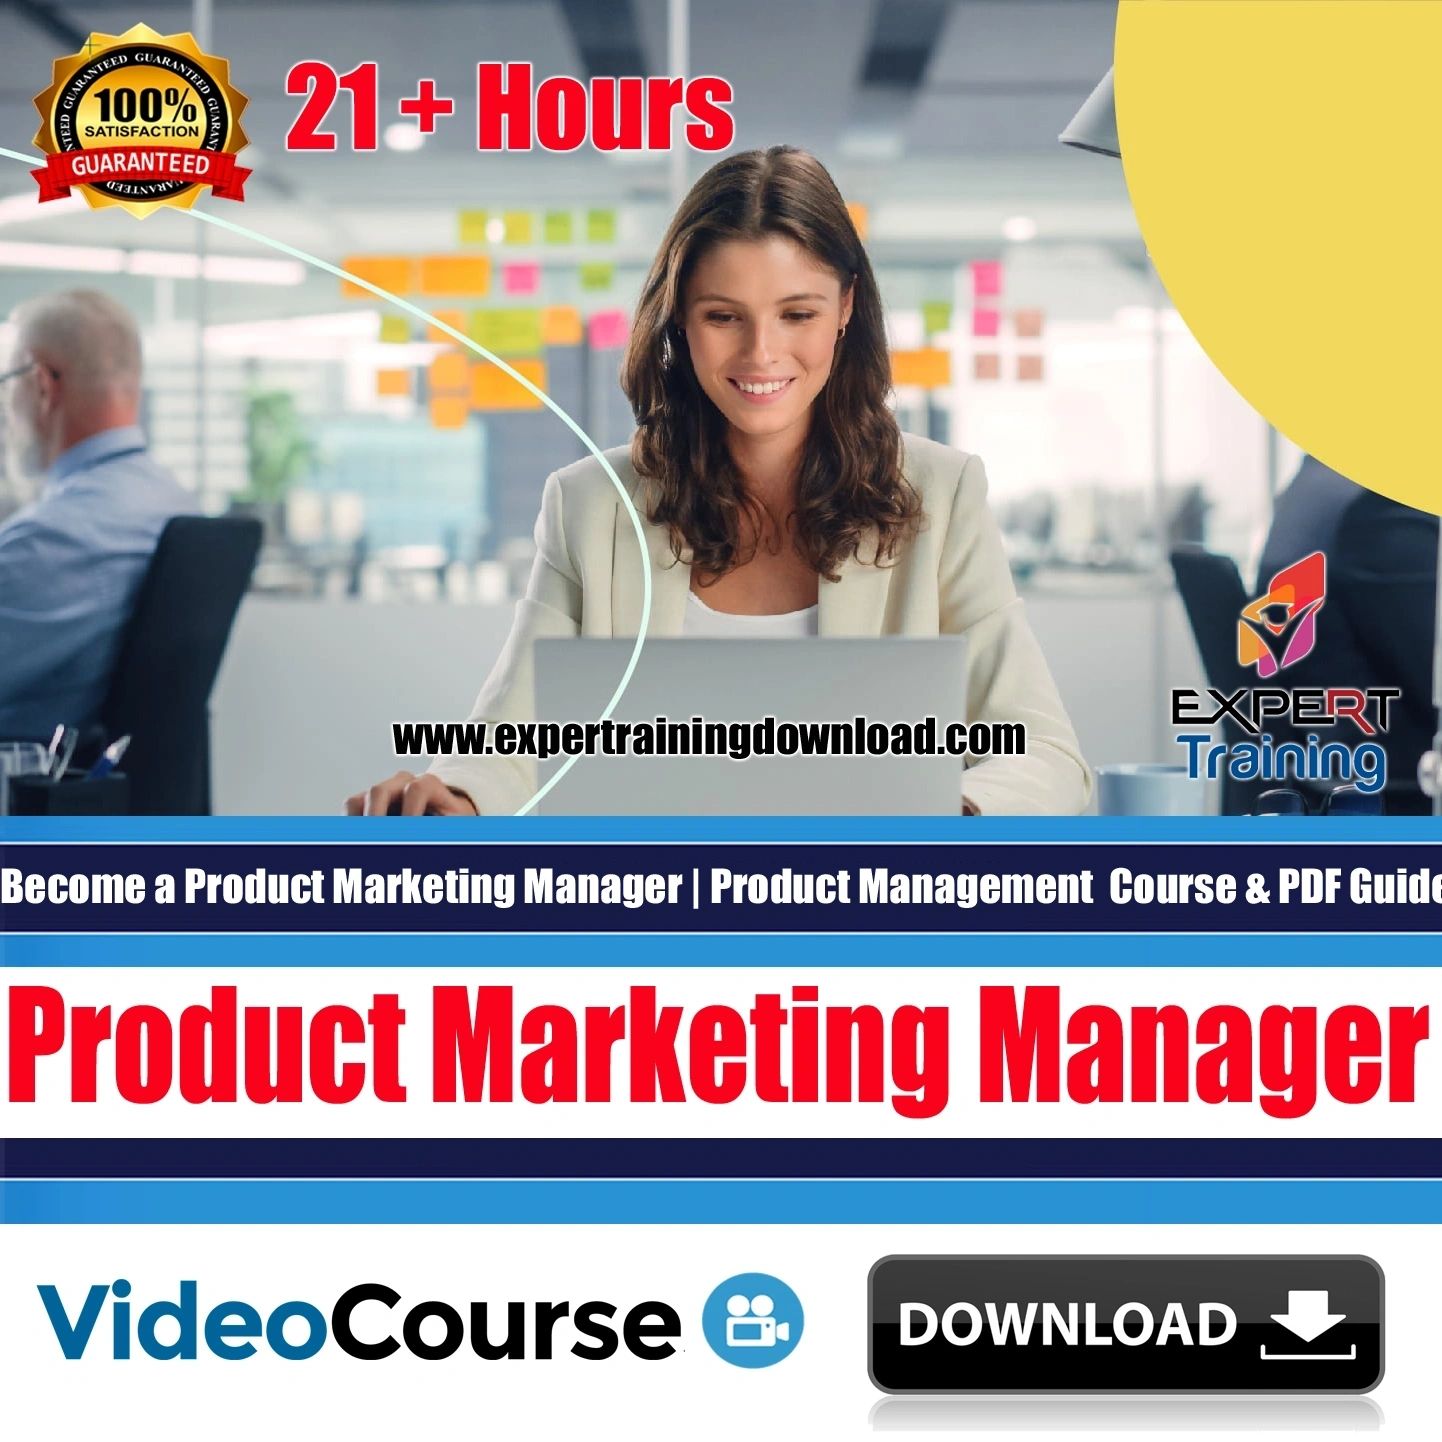 Become a Product Marketing Manager ? Product Management 21+ Hours Course & PDF Guides